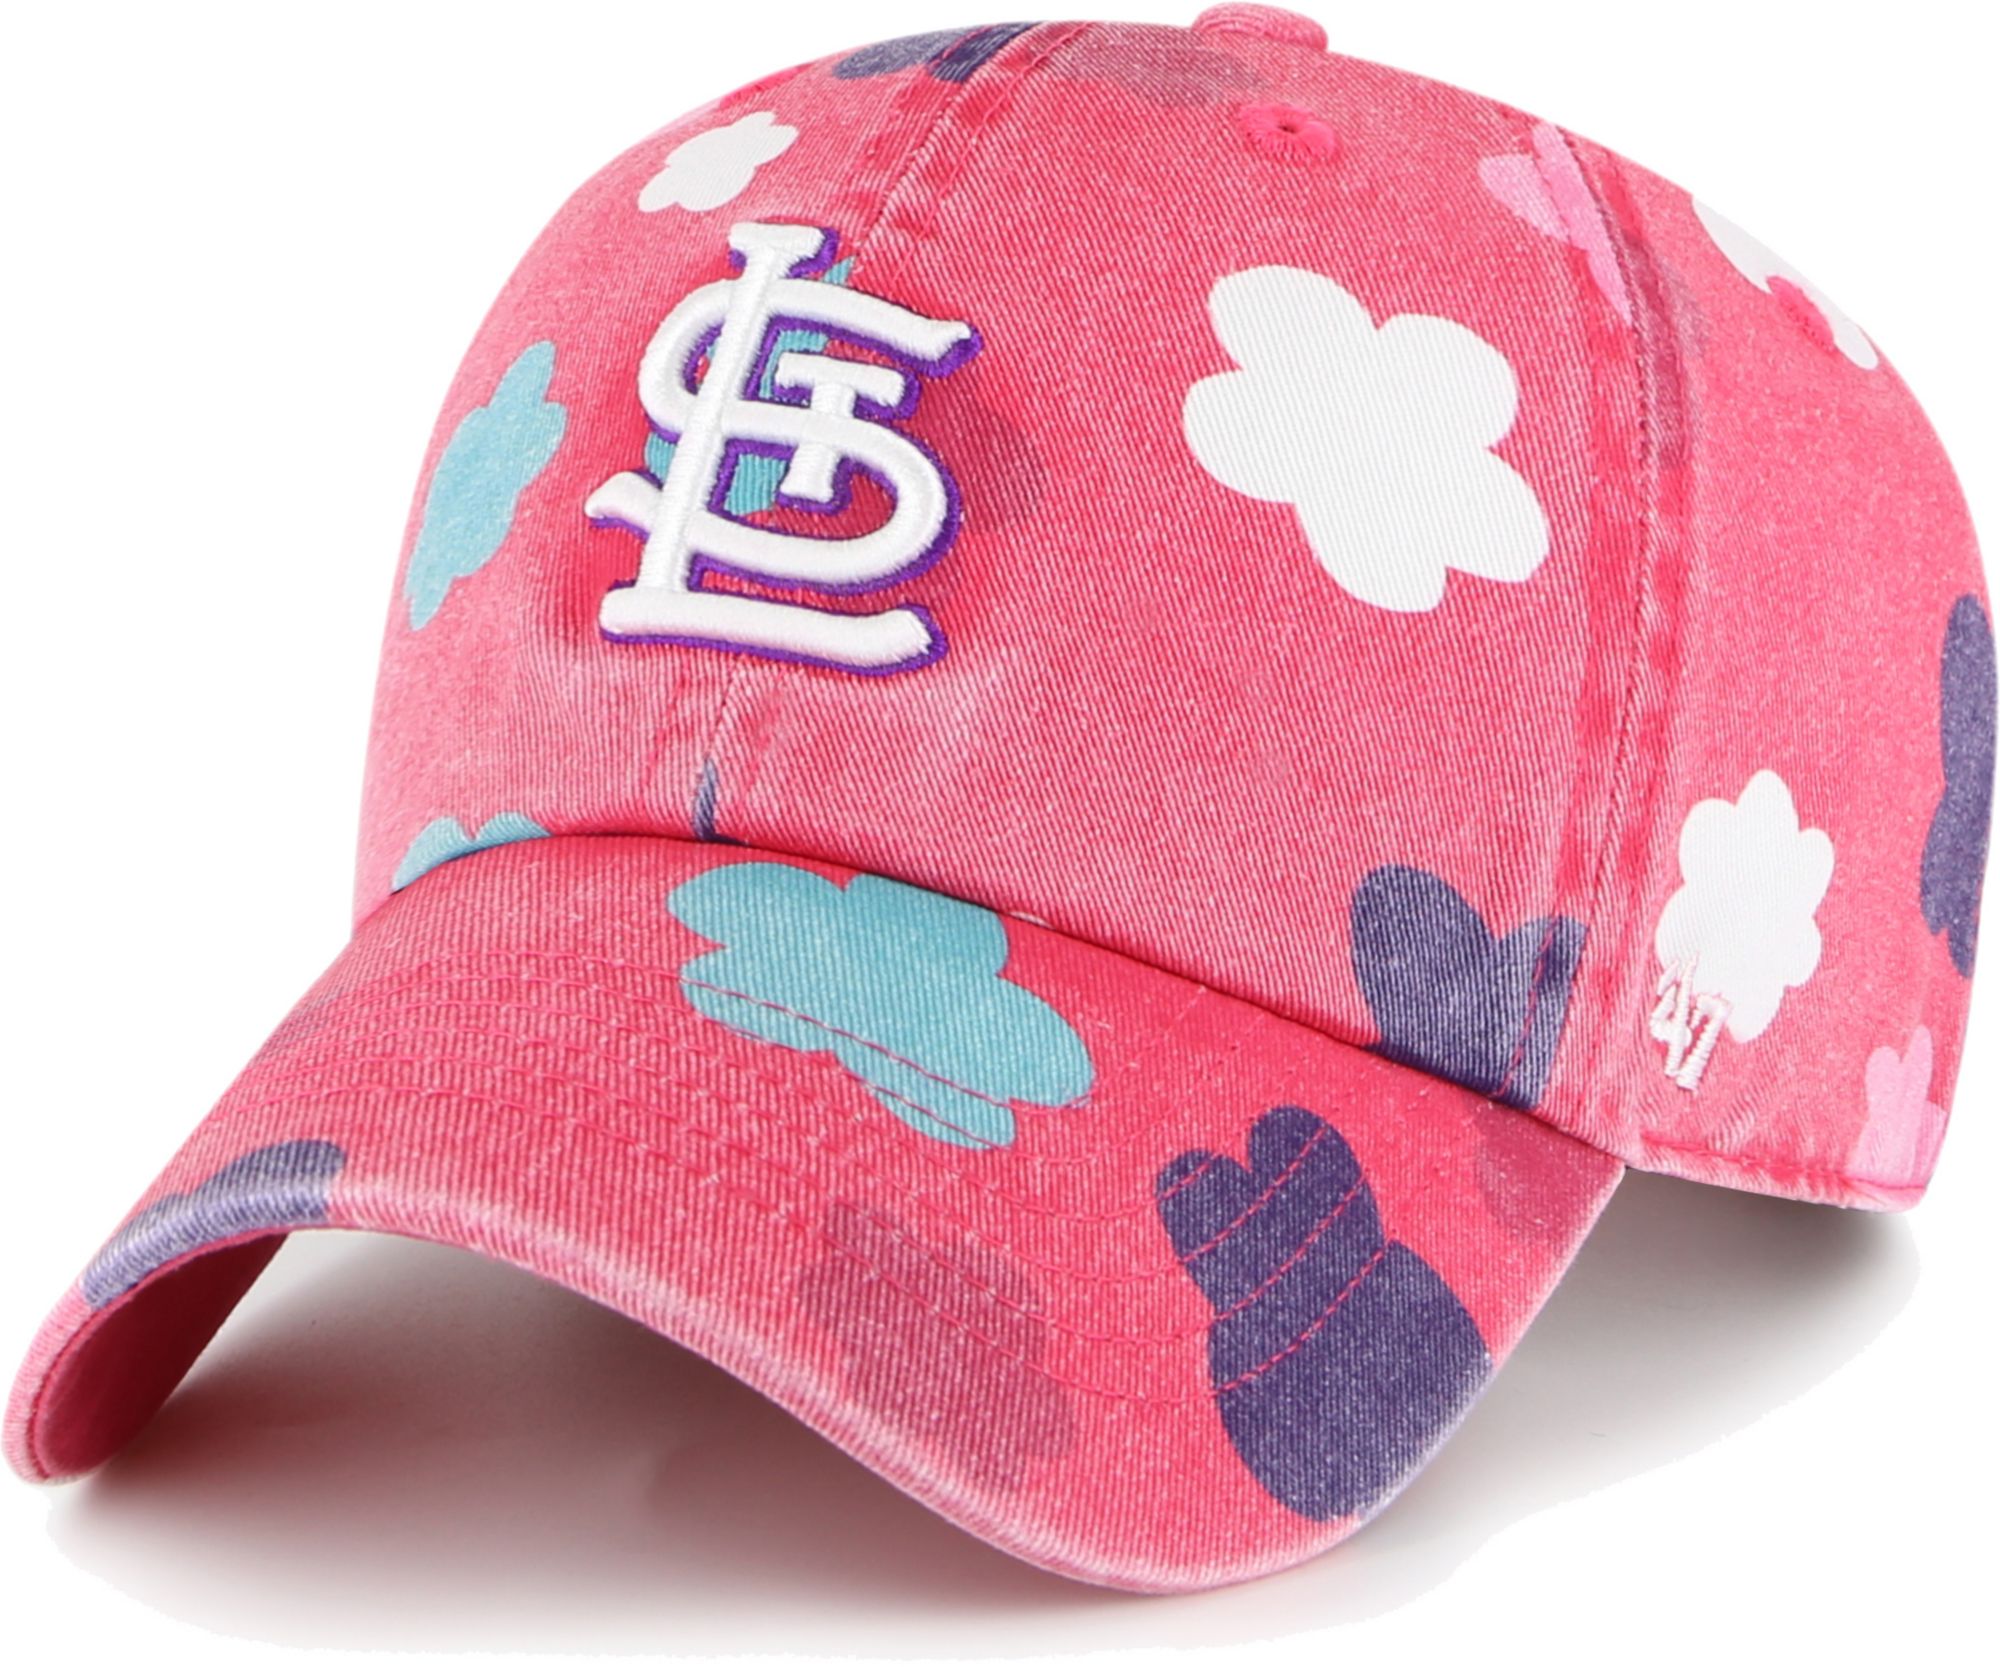 Youth St. Louis Cardinals Pink Clean Up Adjustable Hat